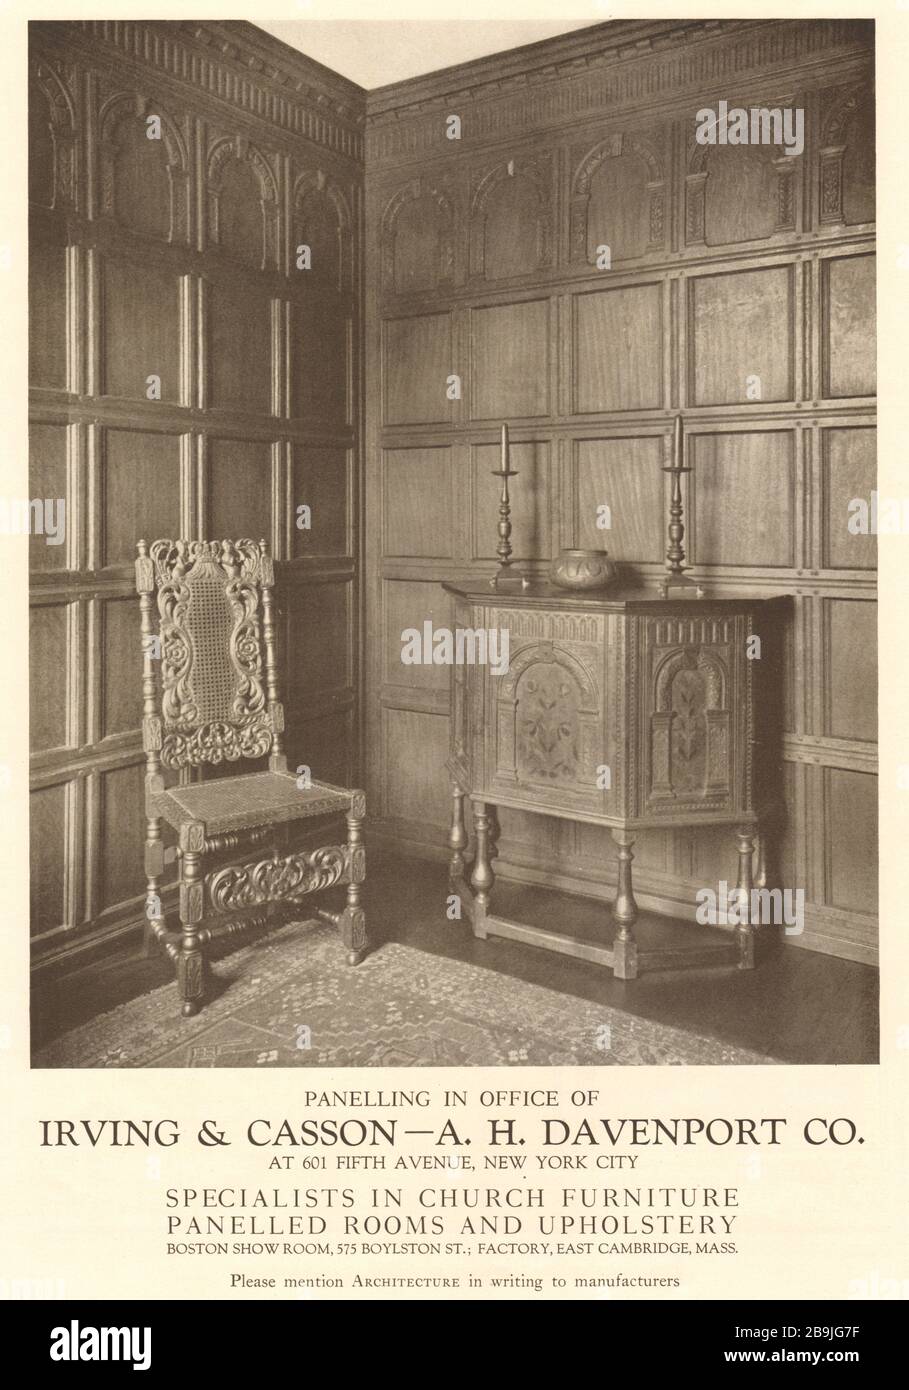 Panelling in office of Irving & Casson- A. H. Davenport Co. Boston show room, 575 Boylston St, Factory, East Cambridge, Massachusetts (1922) Stock Photo